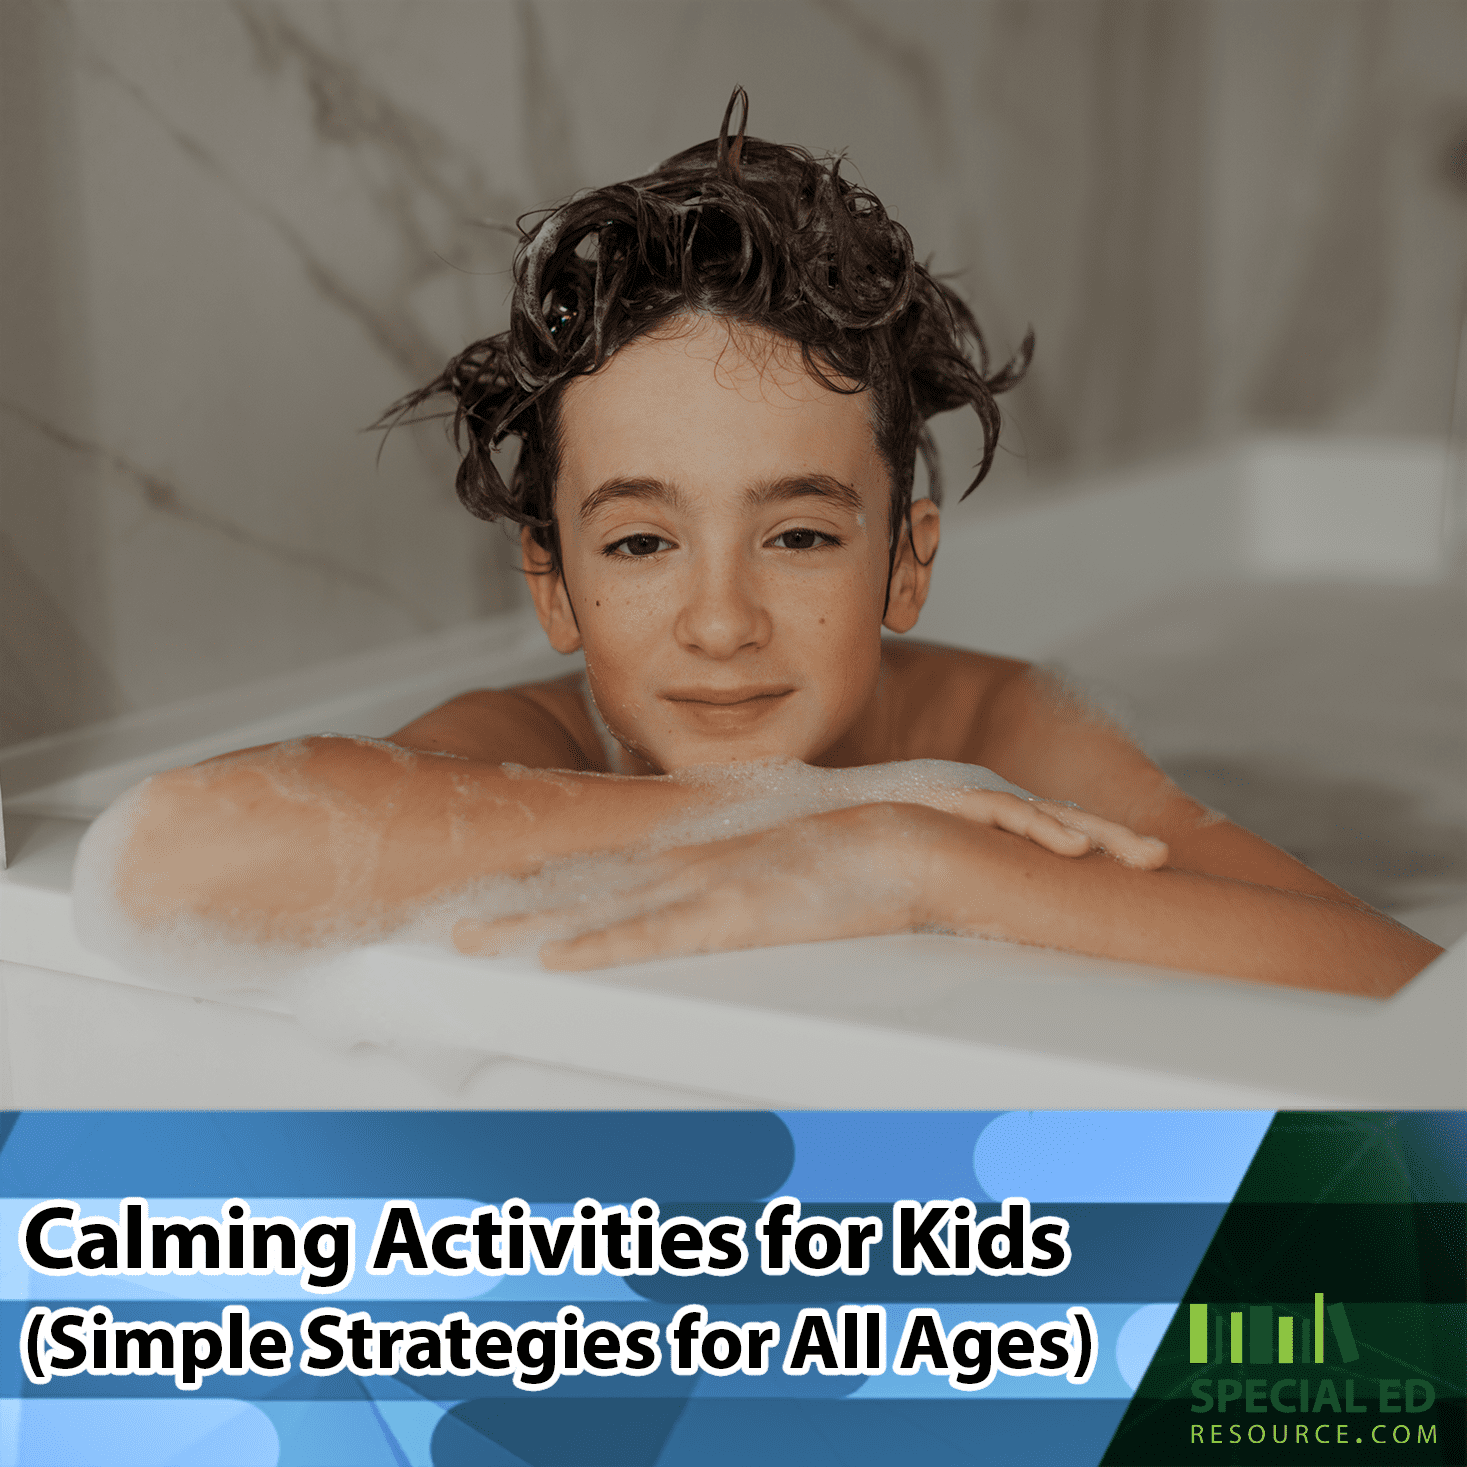 Boy taking a relaxing bubble bath one of the 54 calming activities for kids which are super simple strategies for all ages.